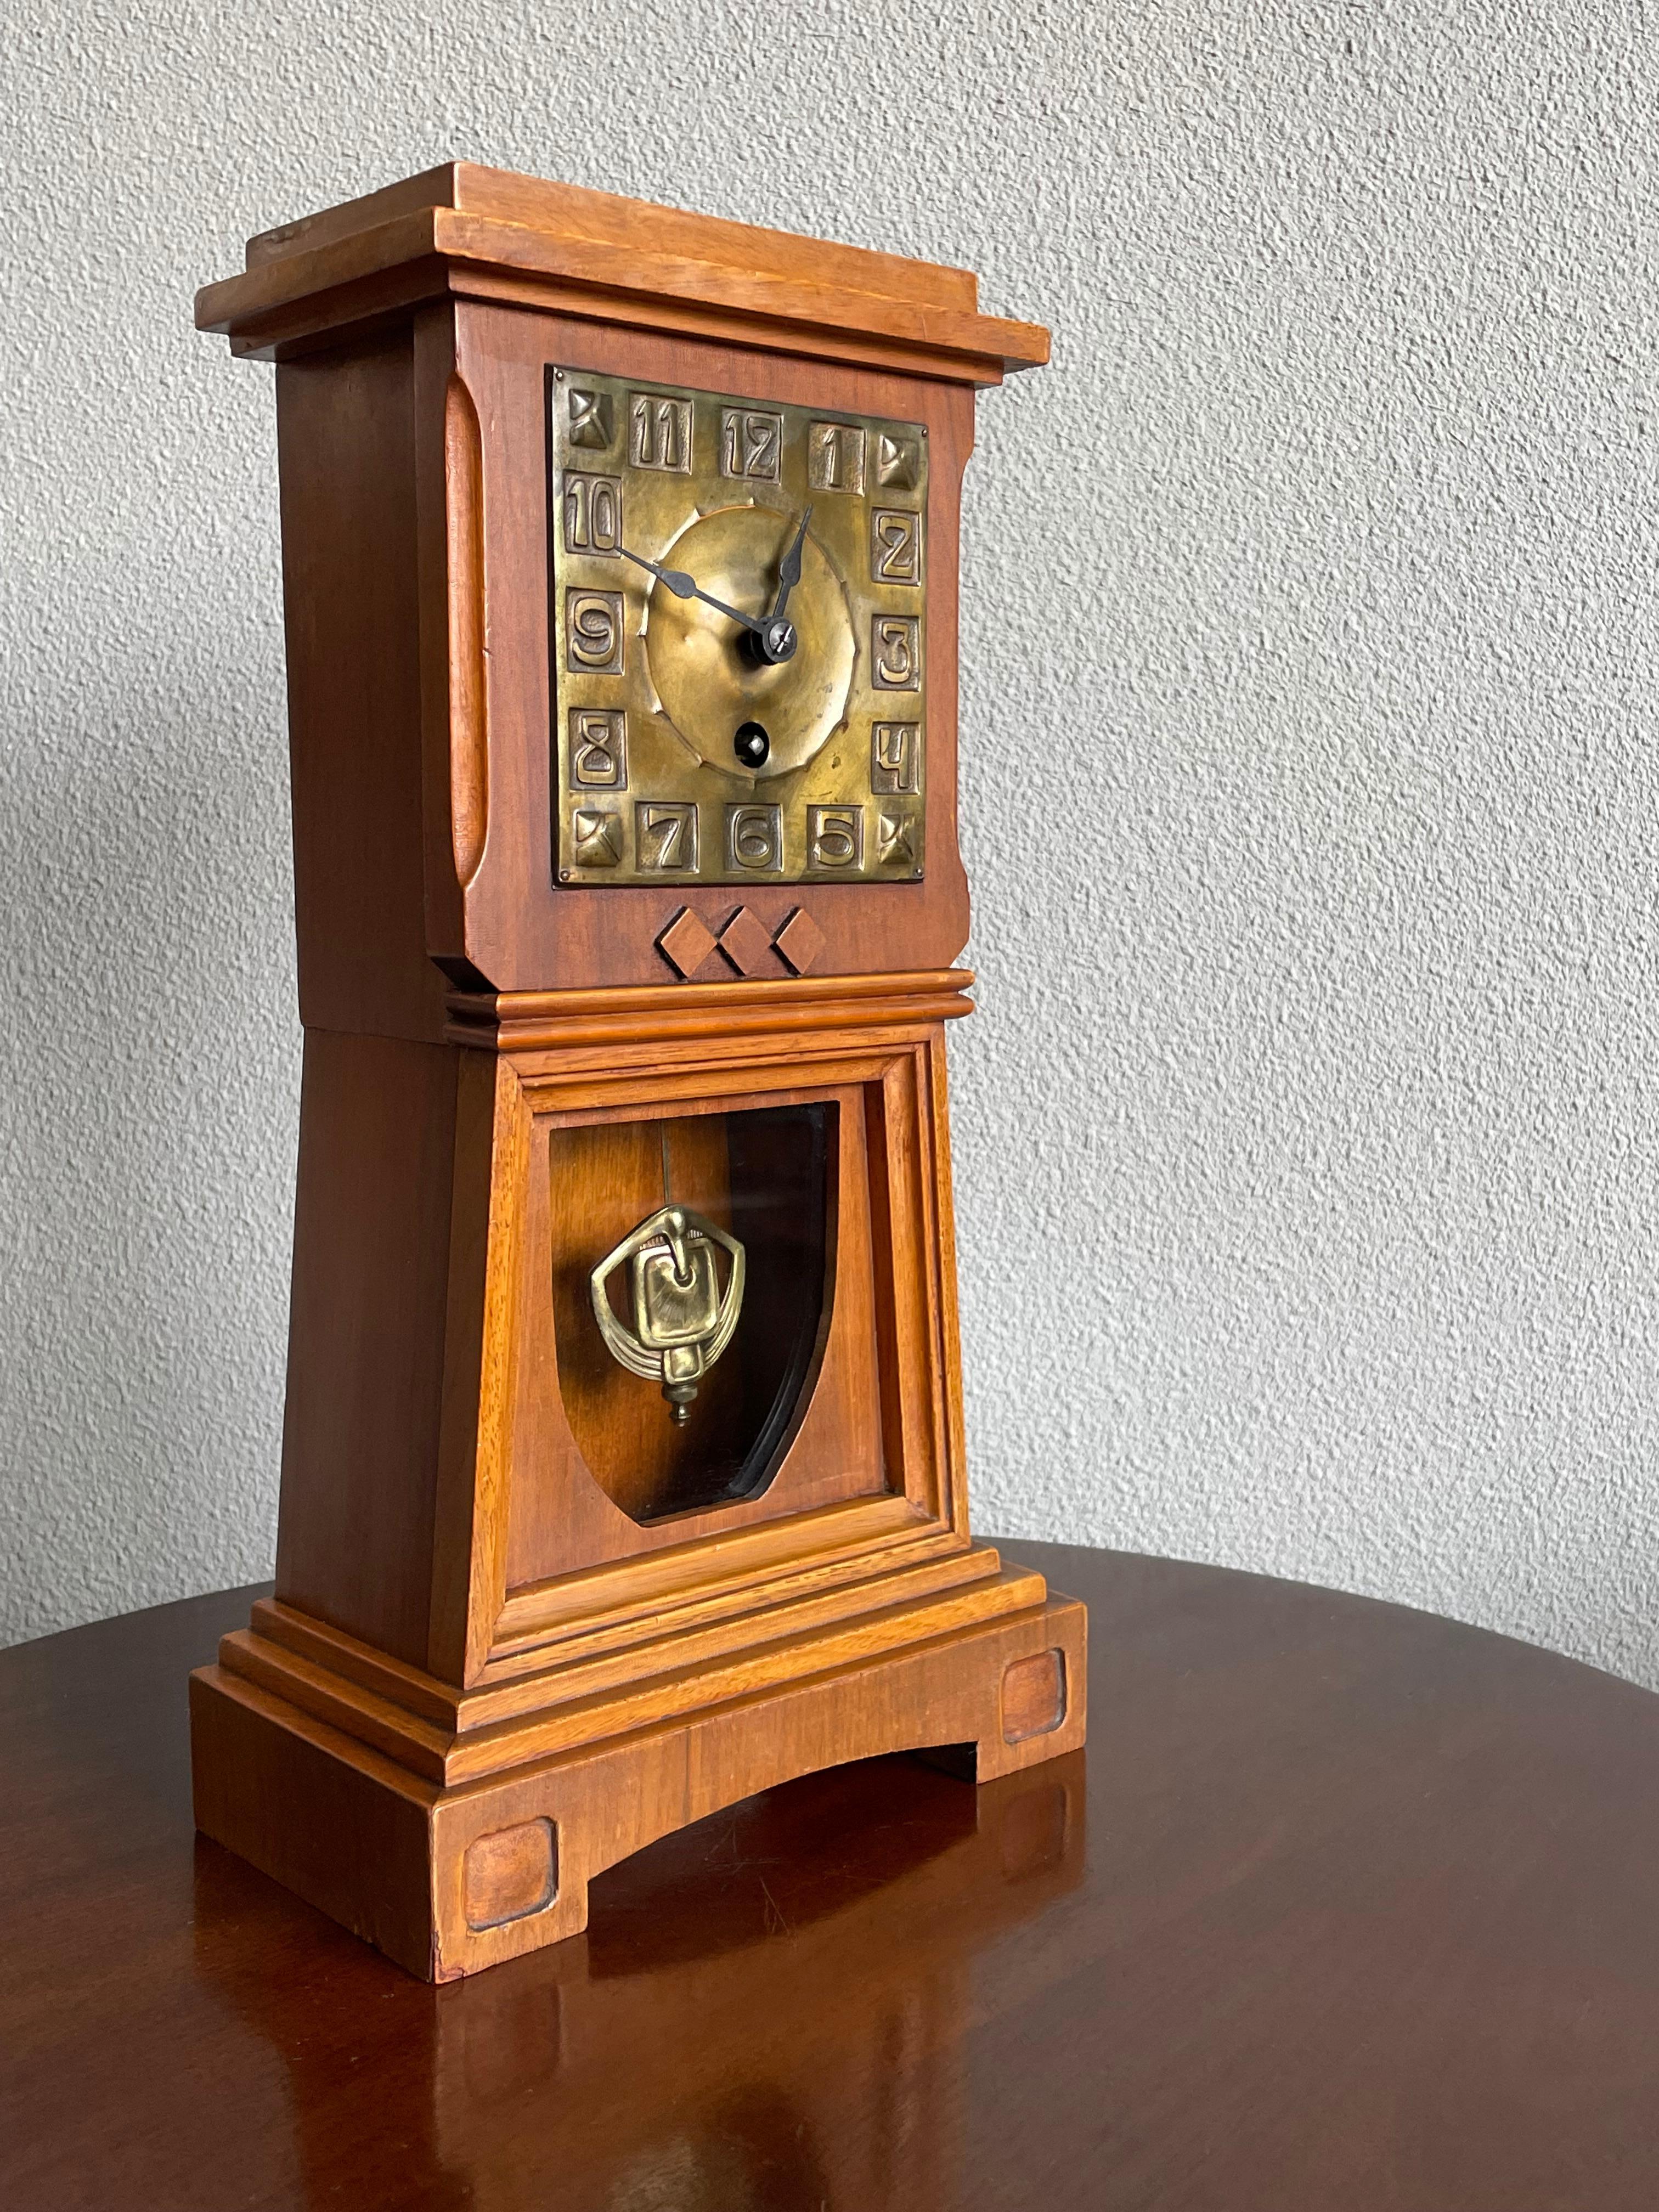 Practical size and beautiful design Arts and Crafts mantel clock.

This extremely stylish and practical size Arts and Crafts table clock is yet another one of our recent great finds and another prime example of the marvelous workmanship in early